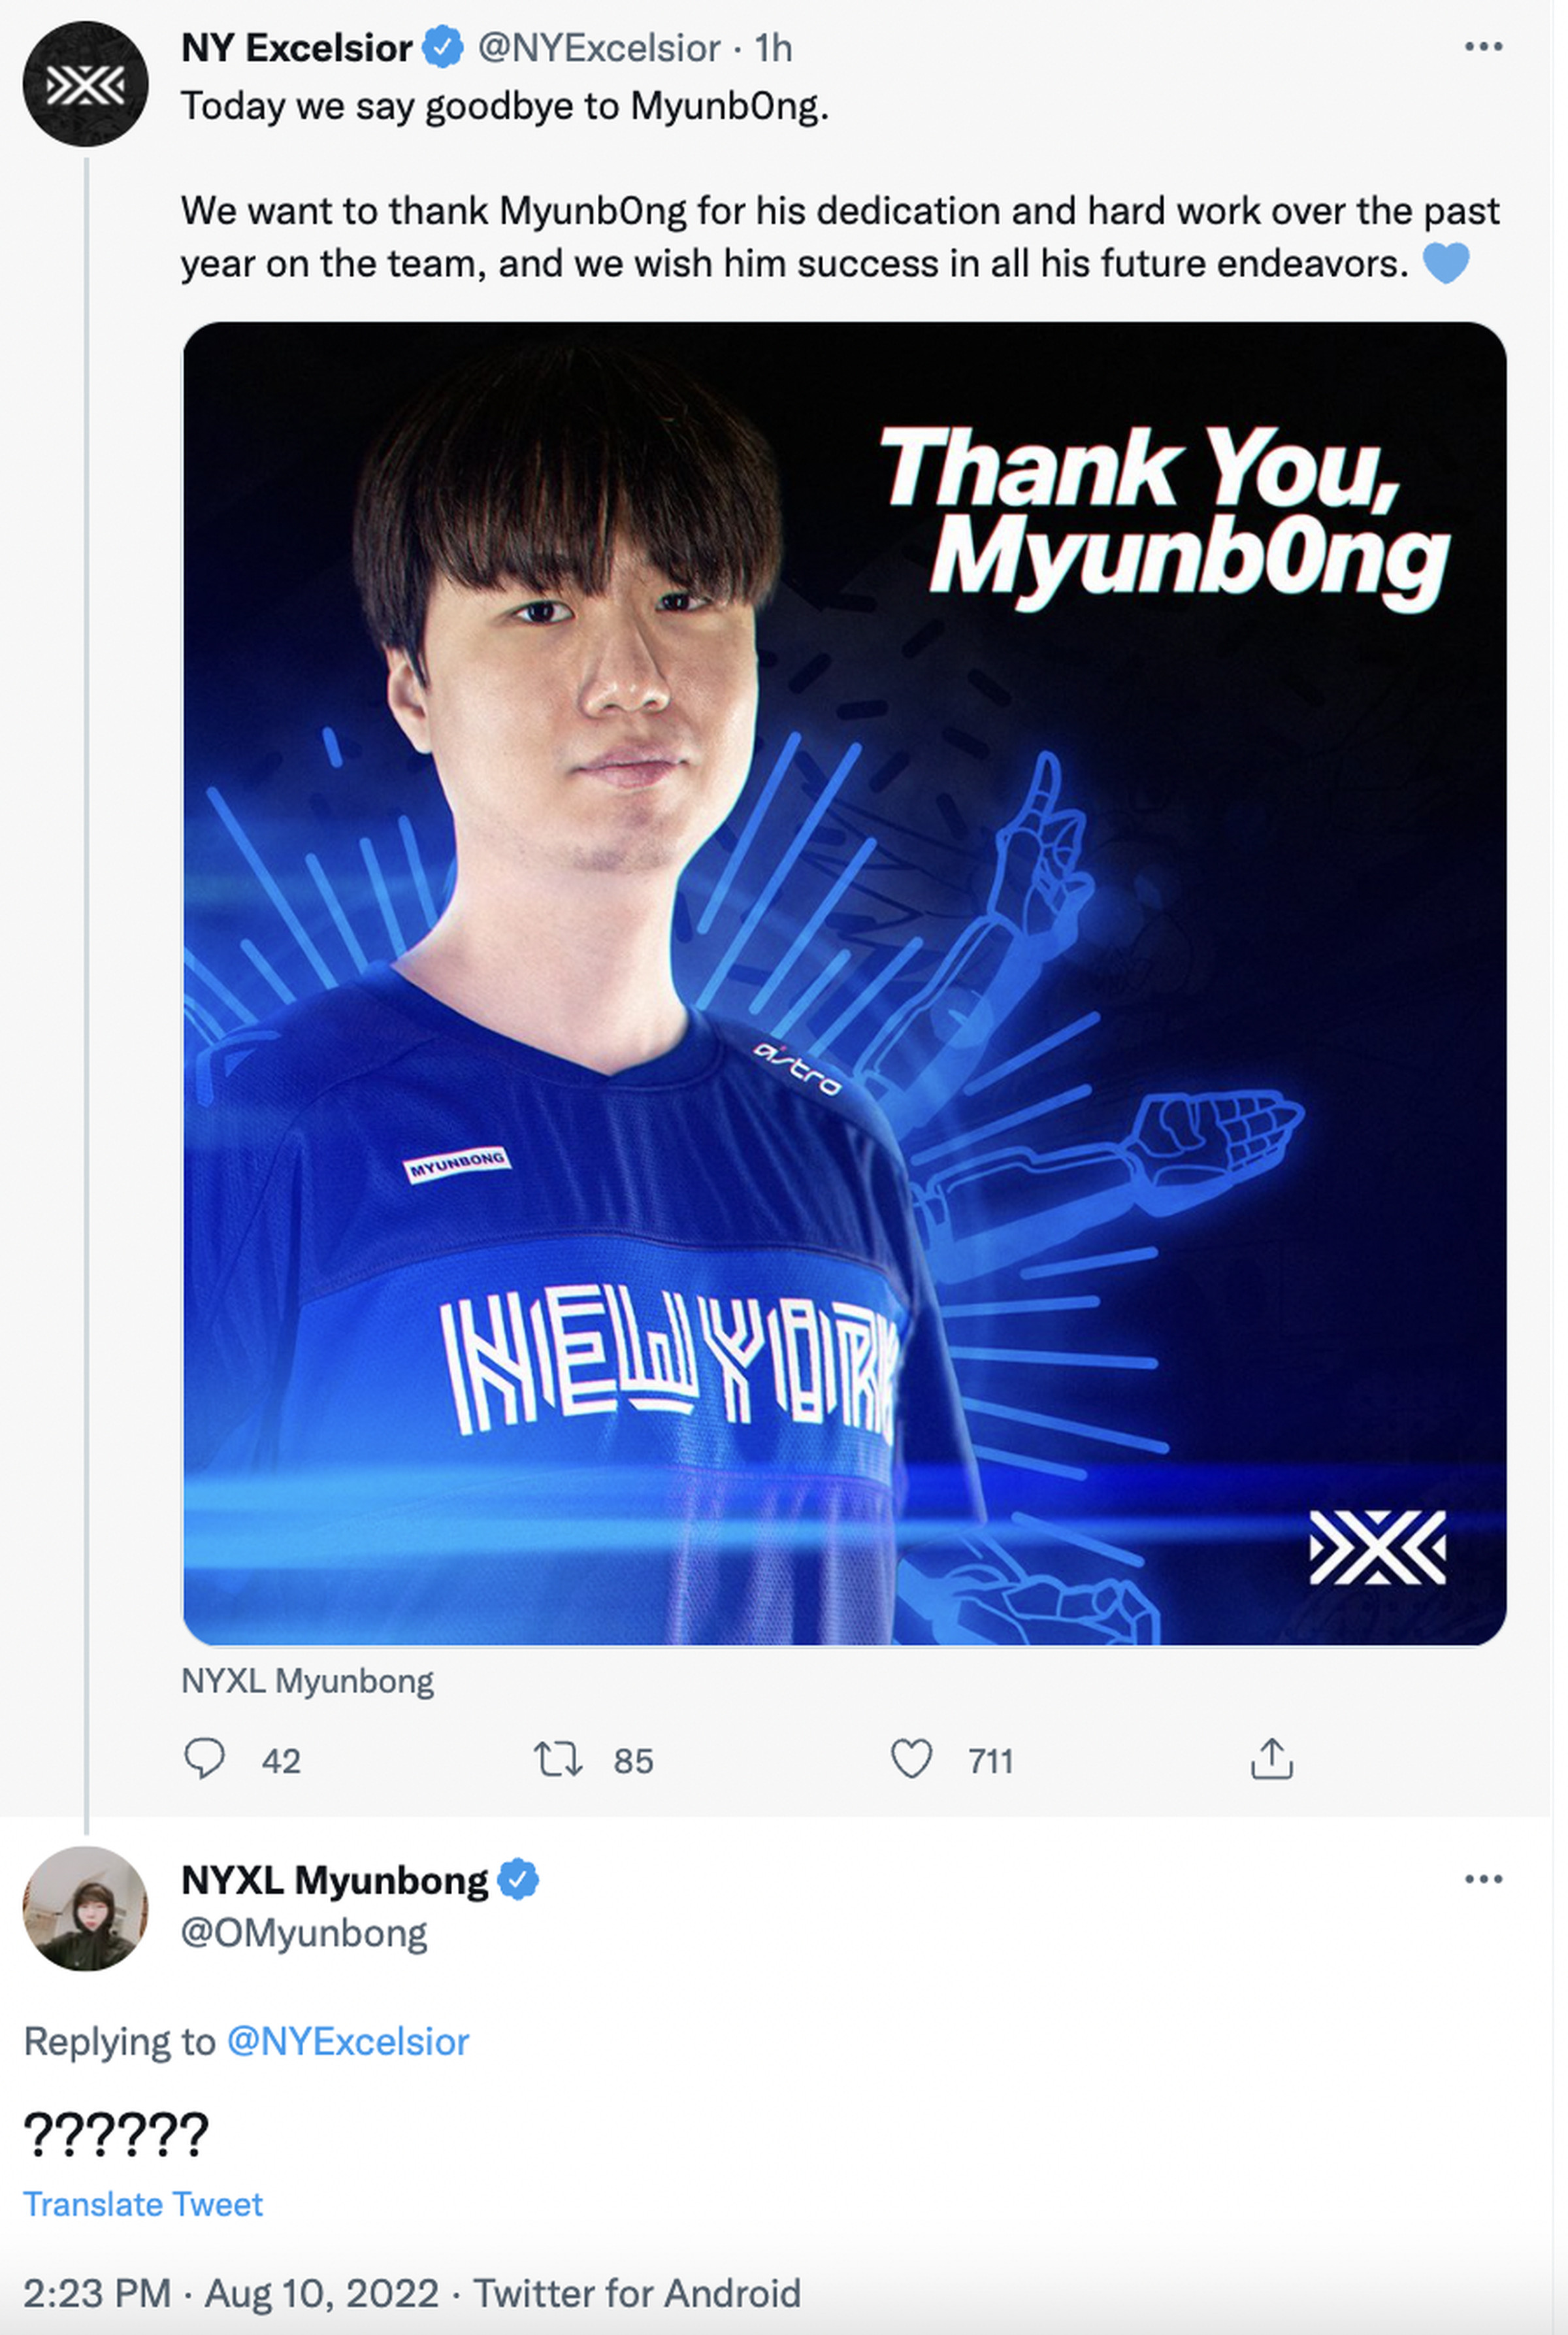 Screenshot from Twitter of two tweets with text as follows: From @NYExcelsior, Today we say goodbye to Myunbong. We want to thank Myunbong for his dedication and hard work over the past year on the team, and we wish him success in all his future endeavors. Reply: @OMyungbong, ????